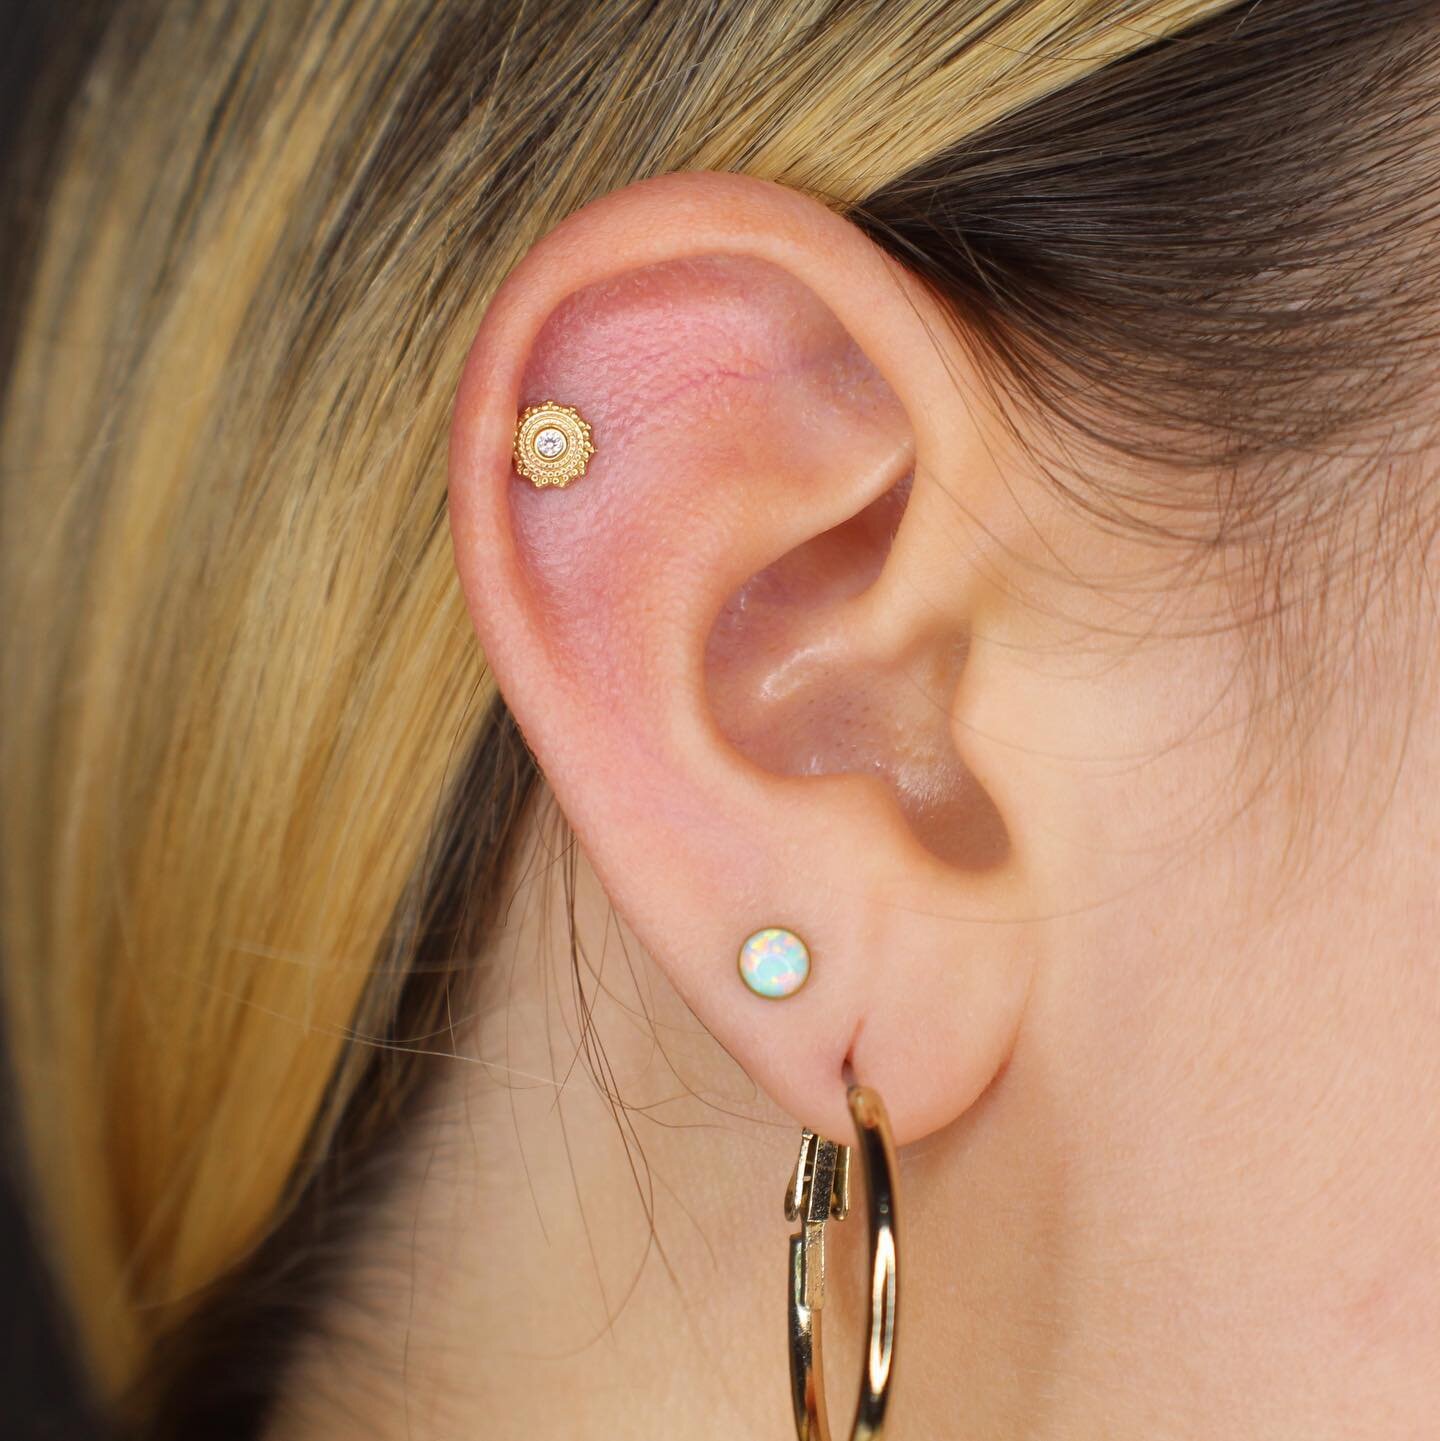 We love a good helix piercing, and this piece looks so good! 🤤 Schedule an appointment today by following the link in our bio 🎊
.
.
.
.
.
#appmember #thepowersthatbe #vancouverwa #vanwa #piercing #safepiercing #bodypiercing #piercingjewelry #fineje